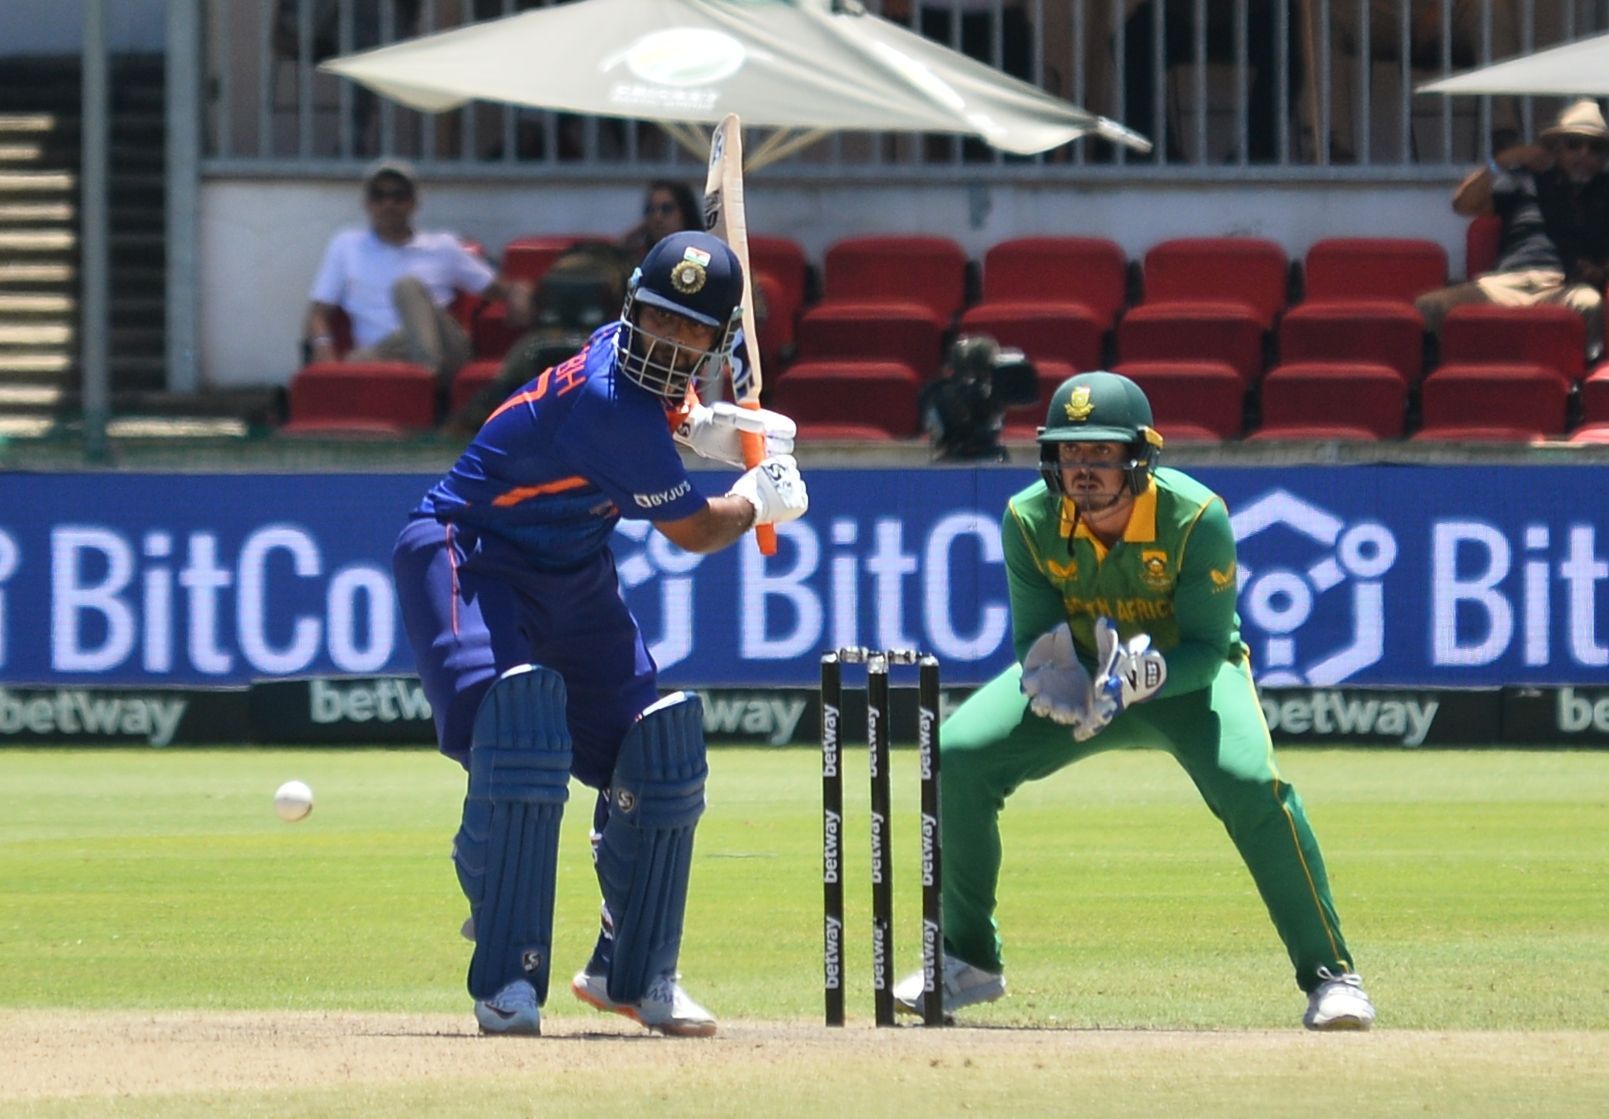 Rishabh Pant played an excellent knock of 85 runs against South Africa.